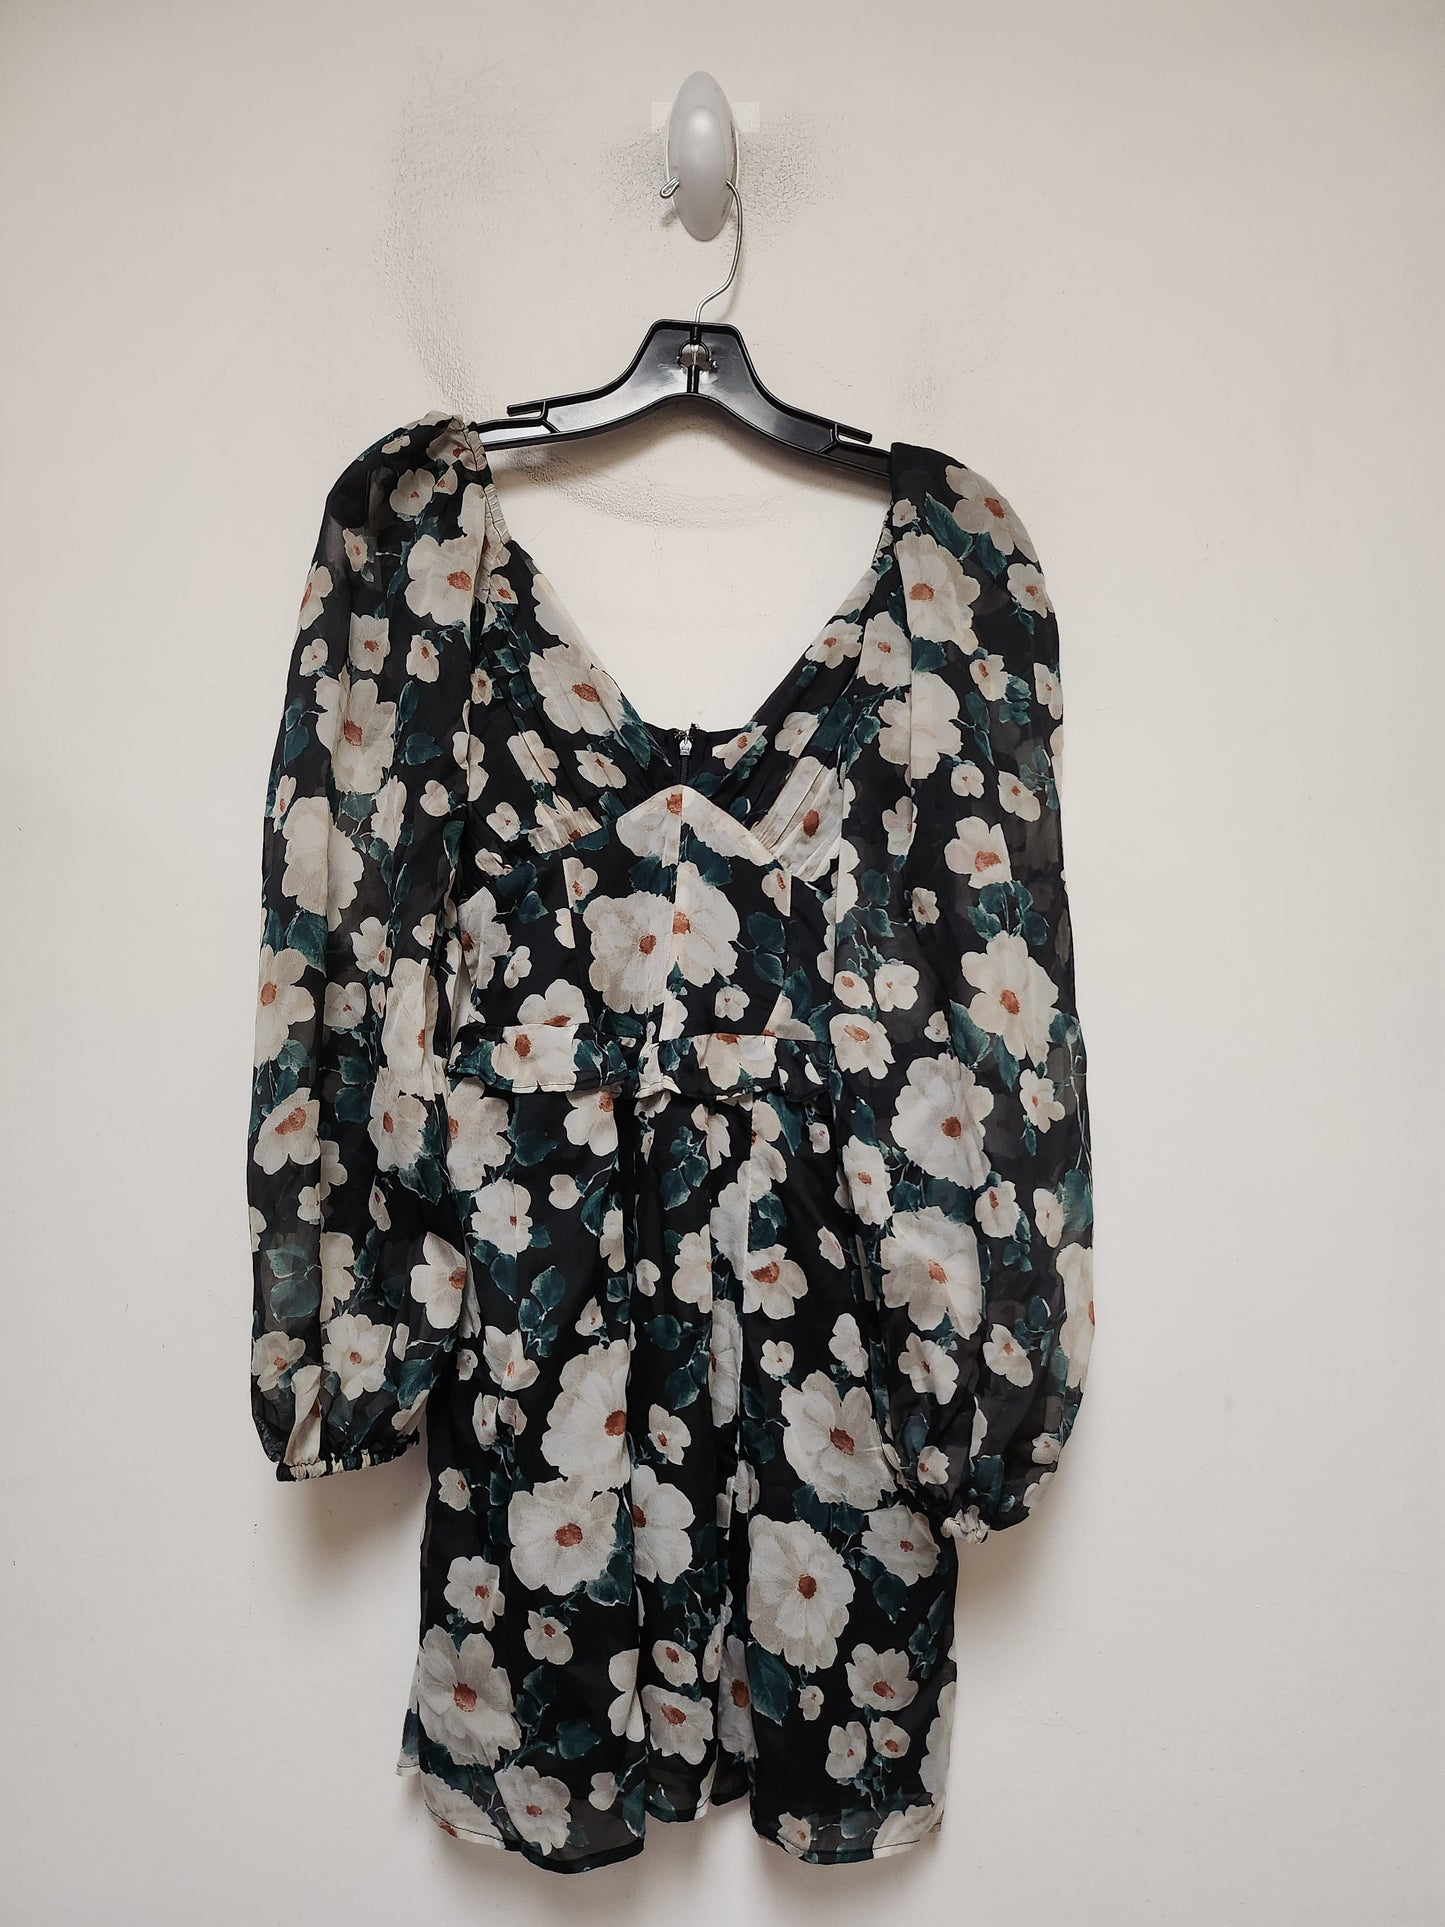 Floral Print Dress Casual Short Abercrombie And Fitch, Size Xs